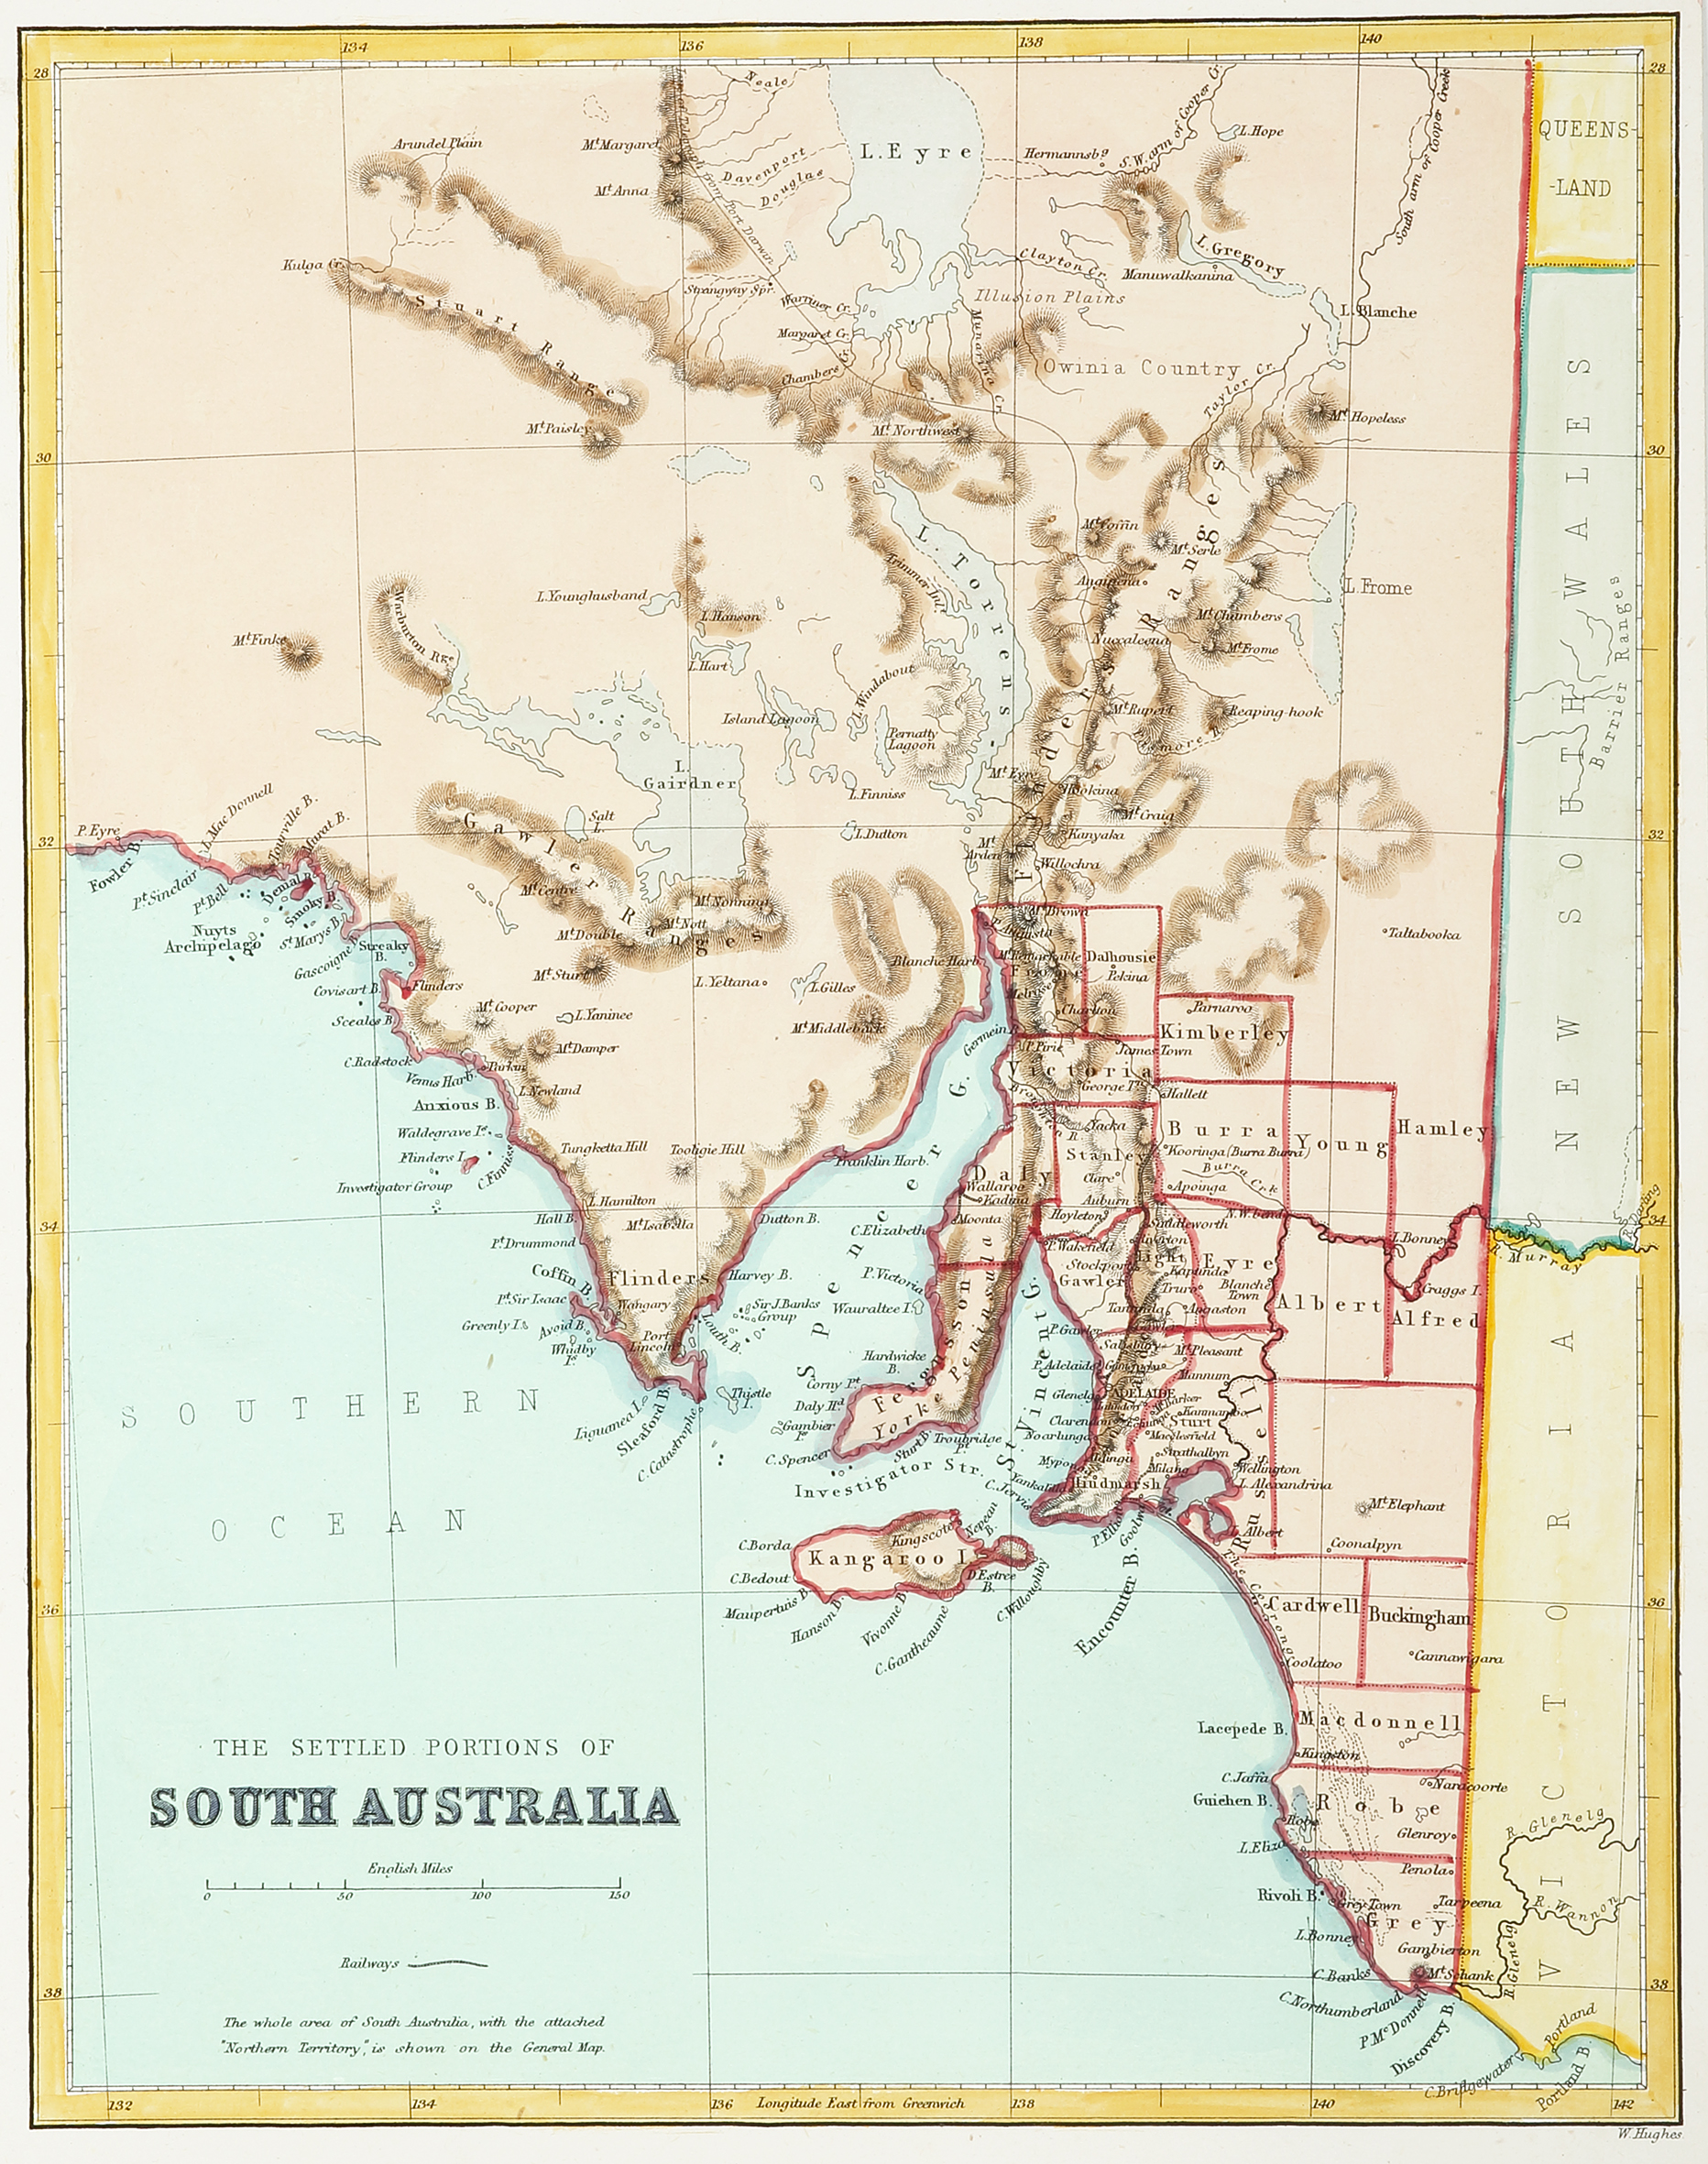 The Settled Portions of South Australia - Antique Map from 1876